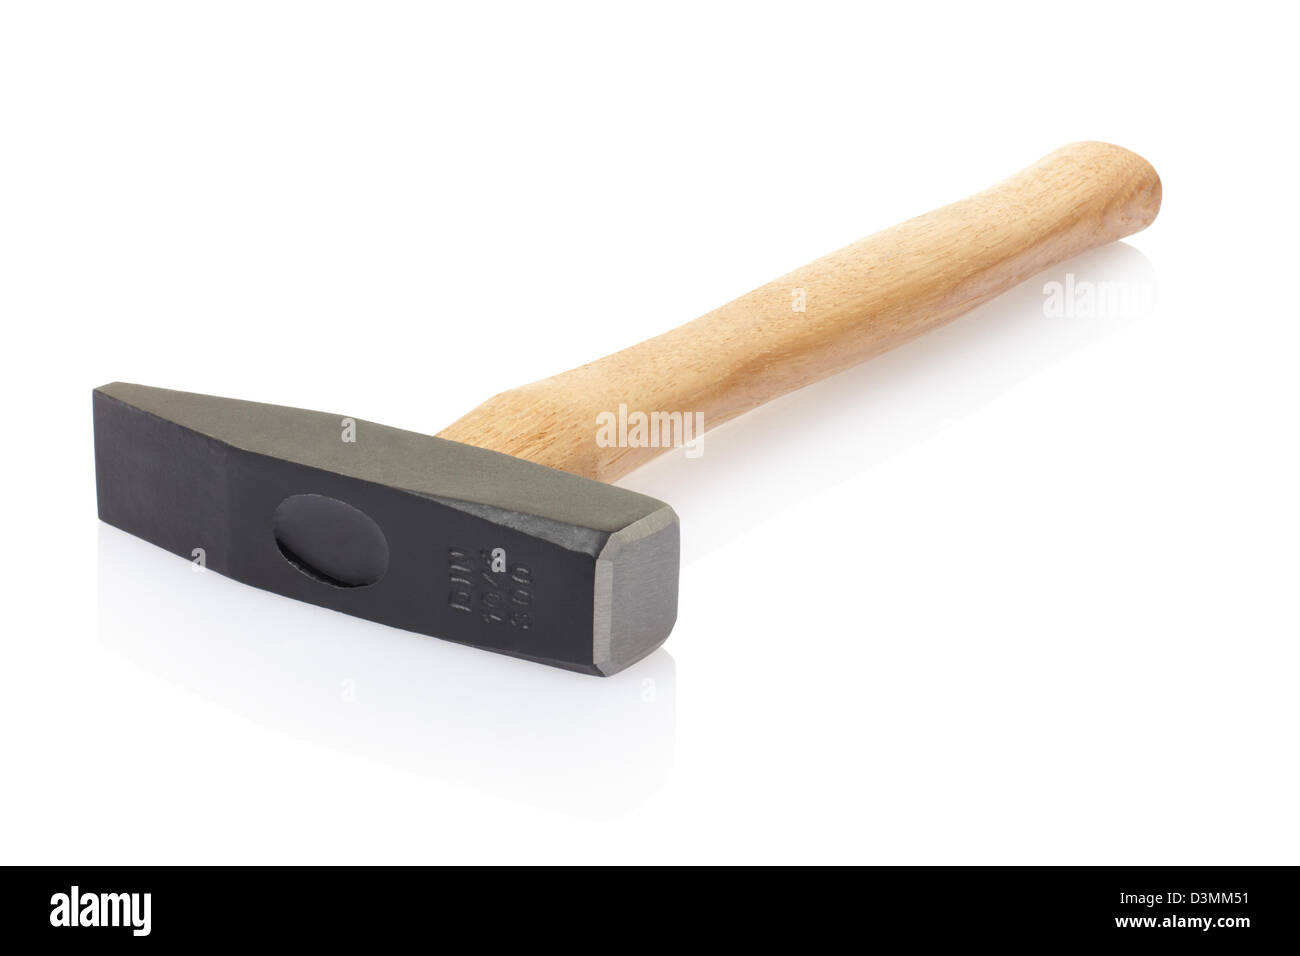 Hammer with wooden grip, perspective view Stock Photo